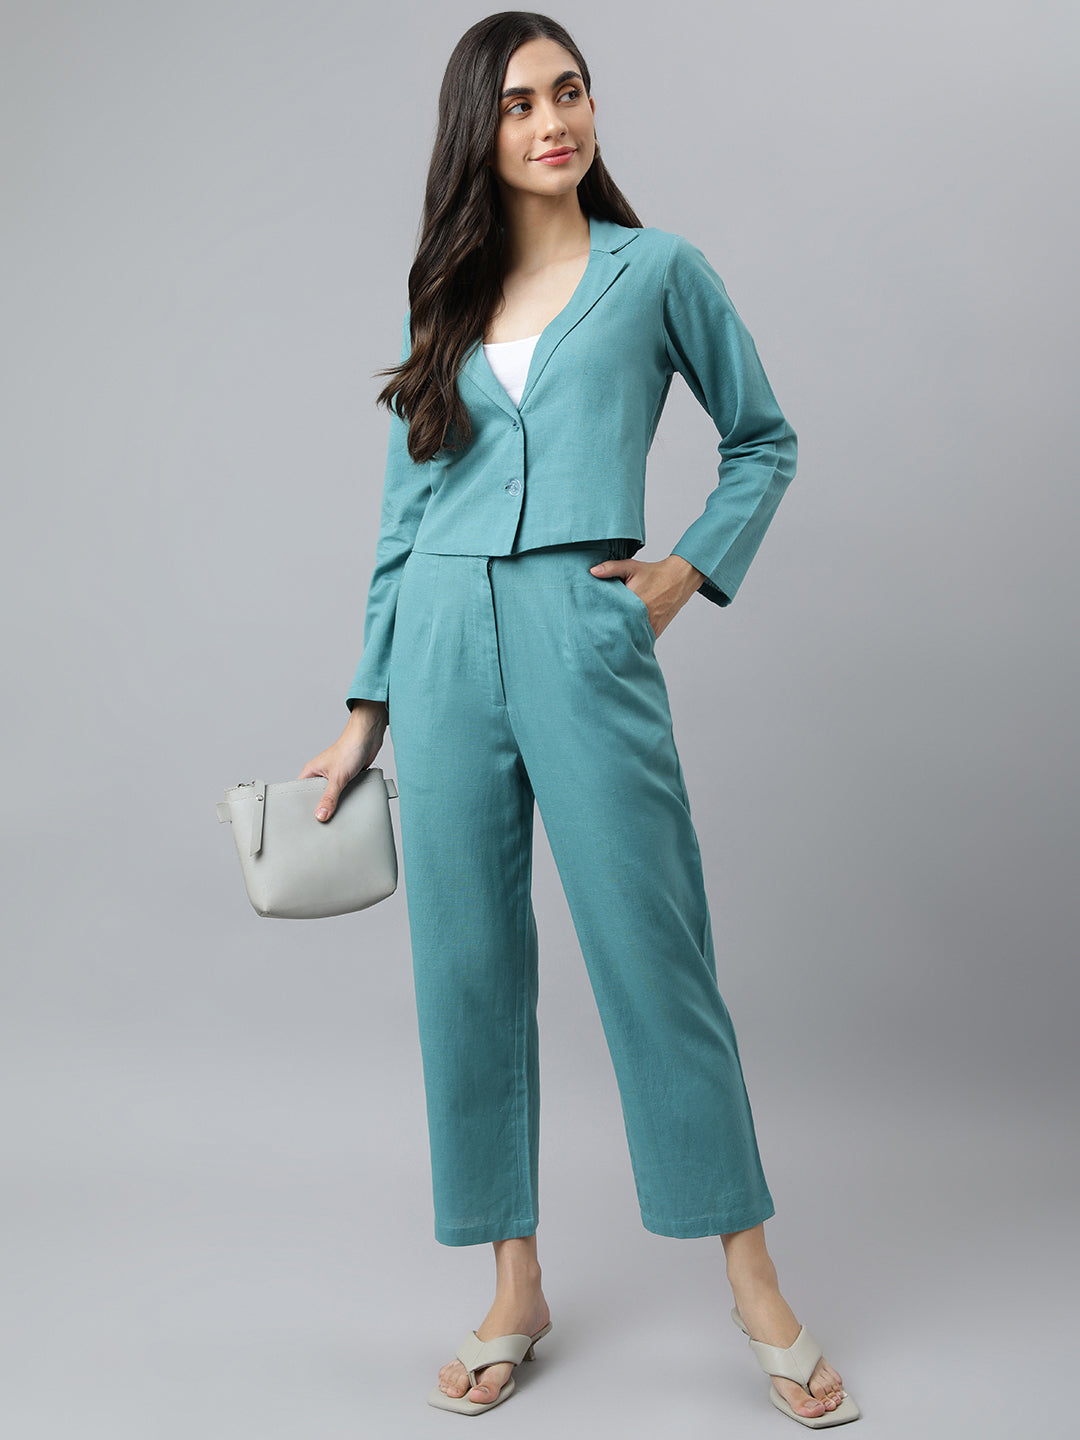 Solid Turquoise Pure Cotton Trousers With Pockets